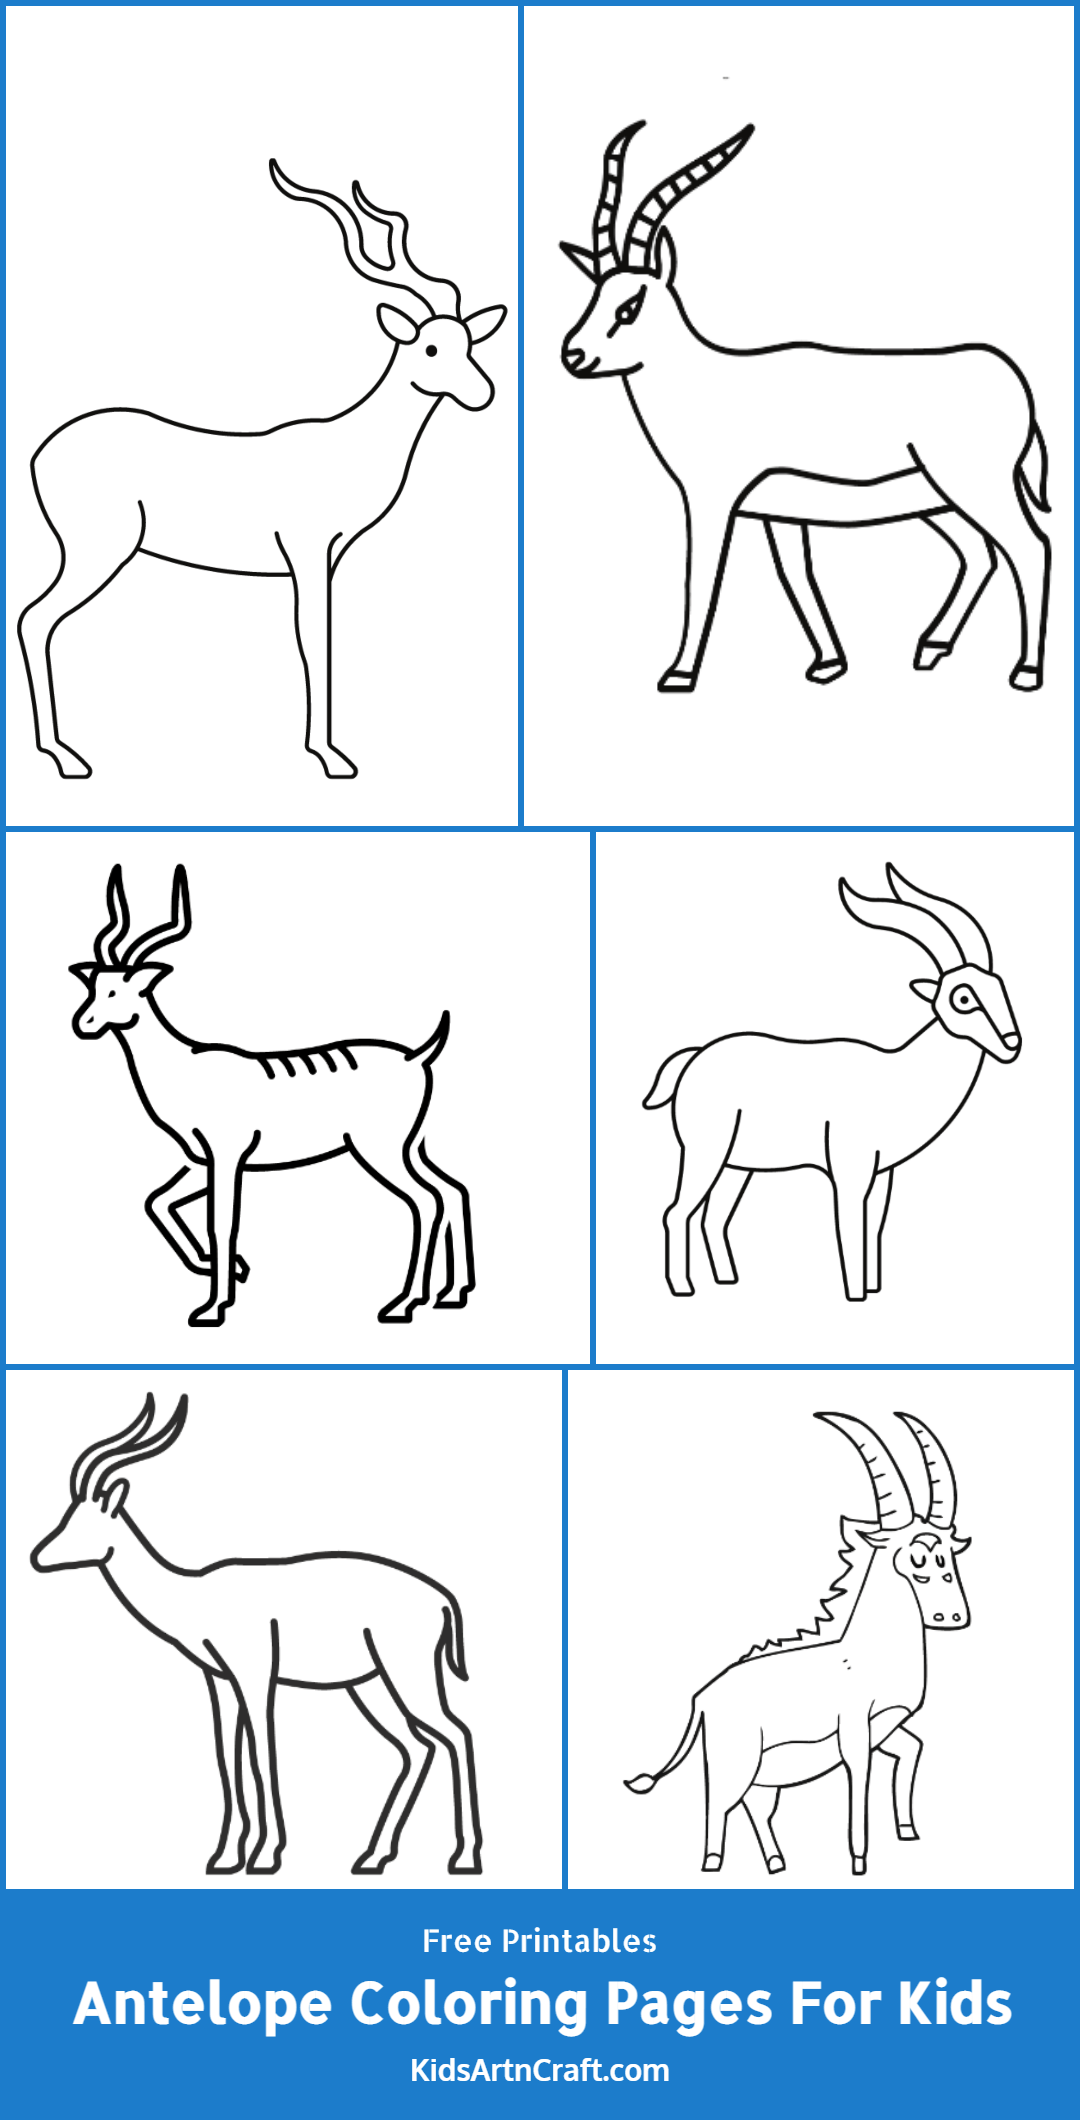 Antelope Coloring Pages For Kids – Free Printables